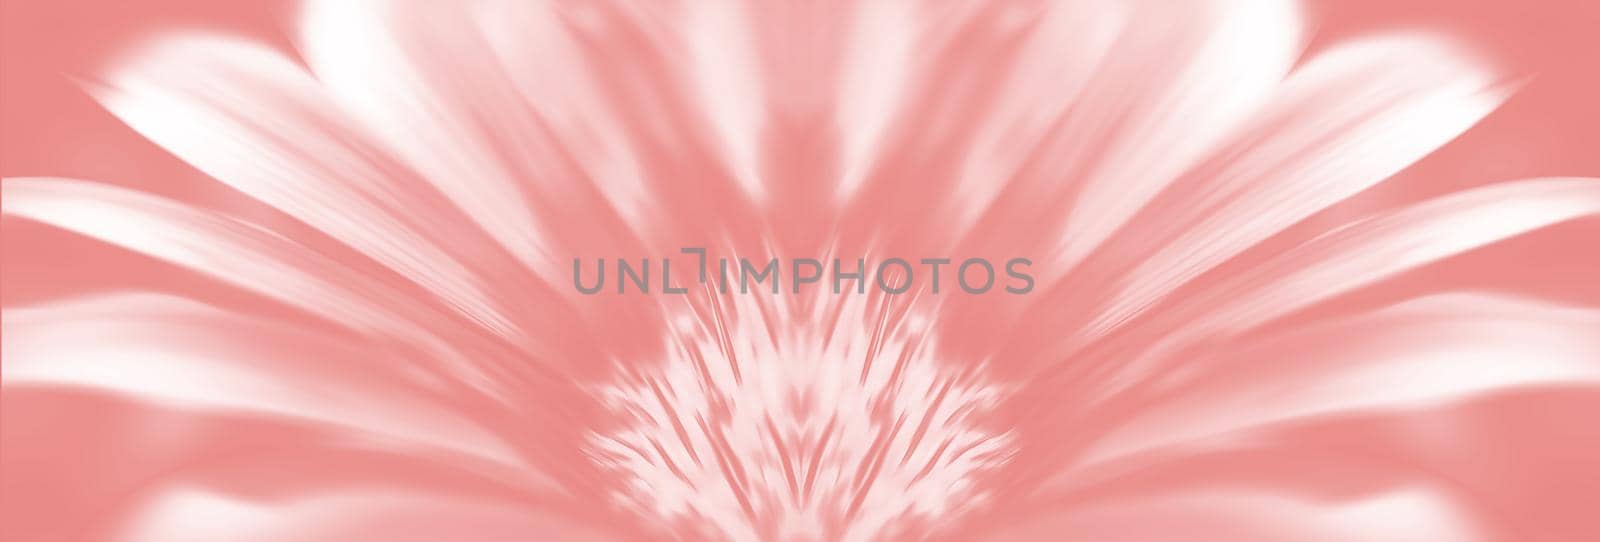 Floral background. Abstract blurred image of gerbera flowers. Image in the trendy coral color